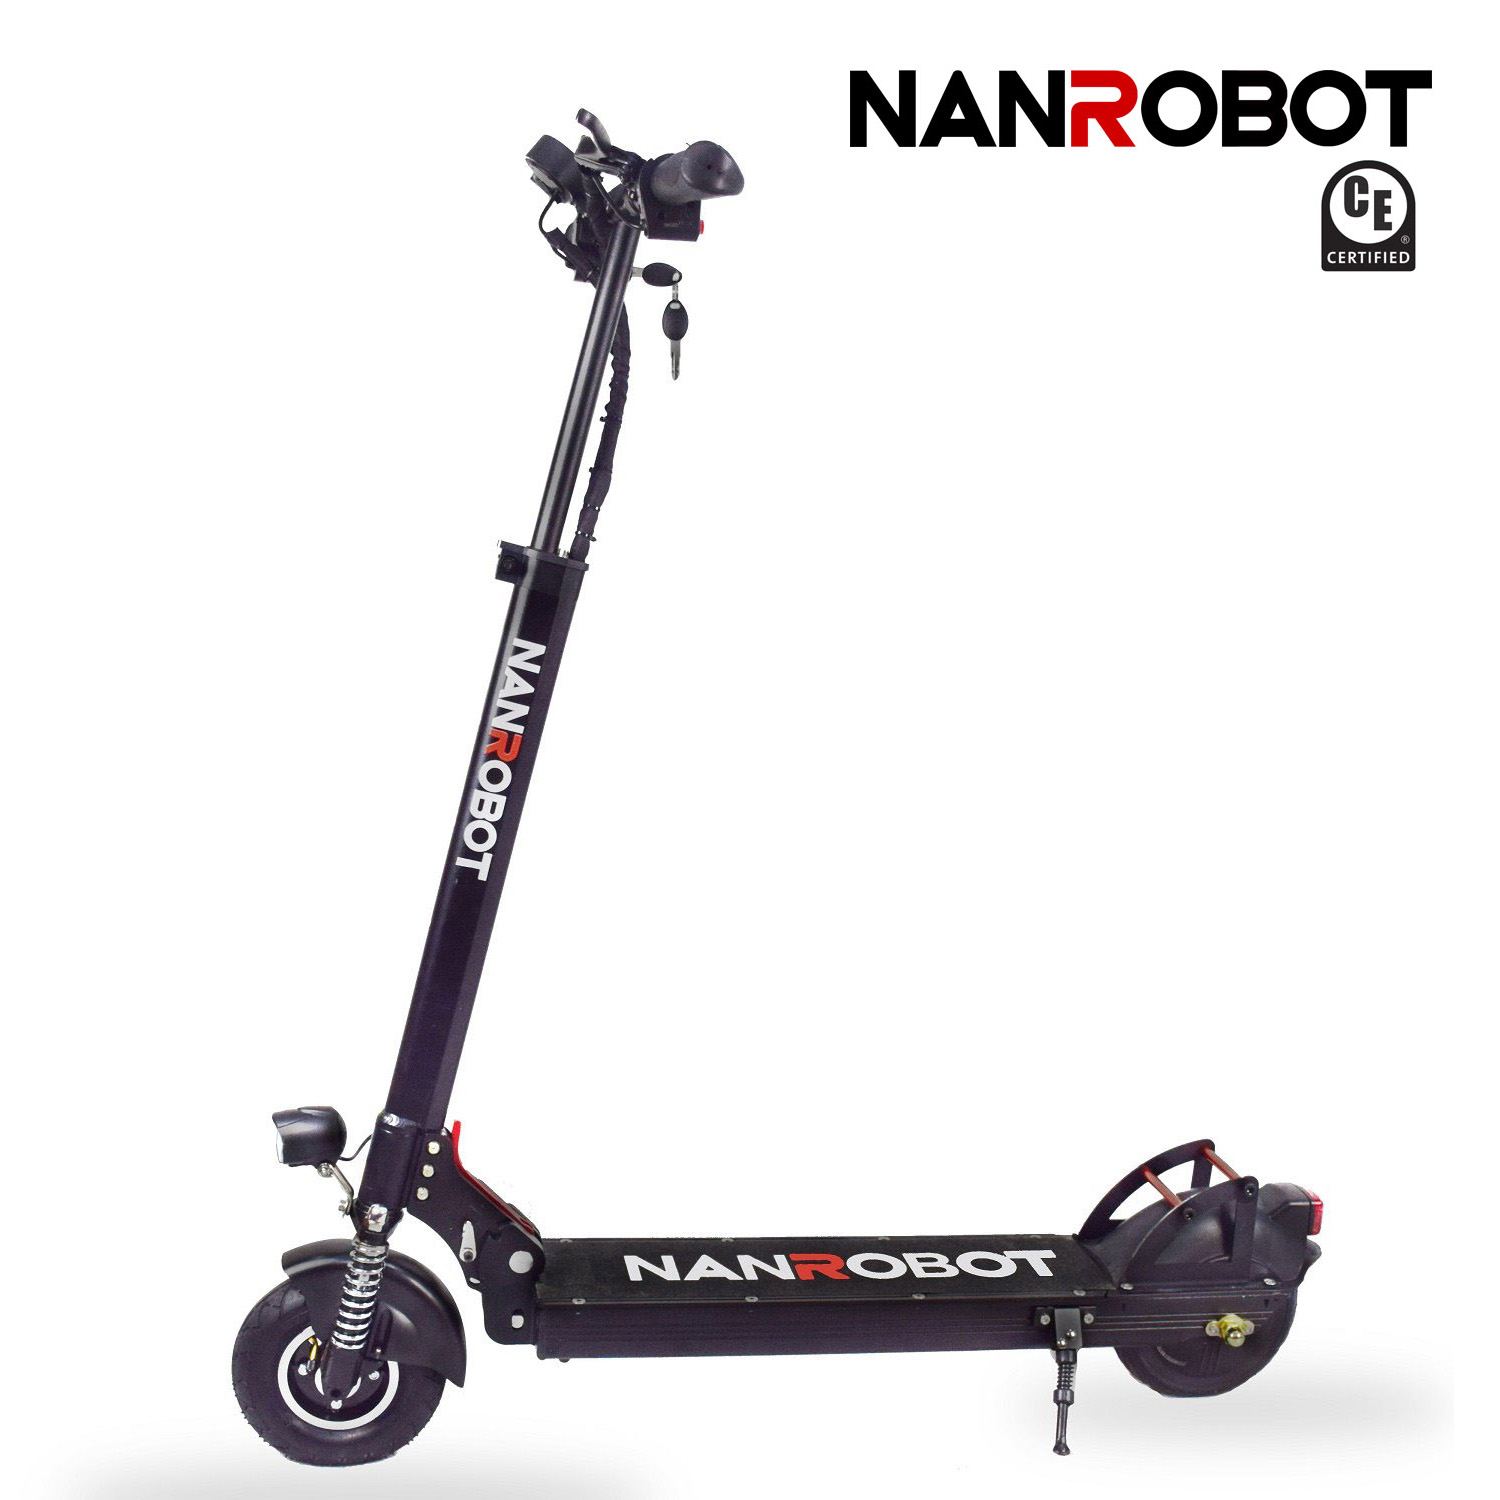 China OEM Motos Electricas Supplier –  NANROBOT X4 ELECTRIC SCOOTER -500W-48V 10.4A – Nanrobot Featured Image